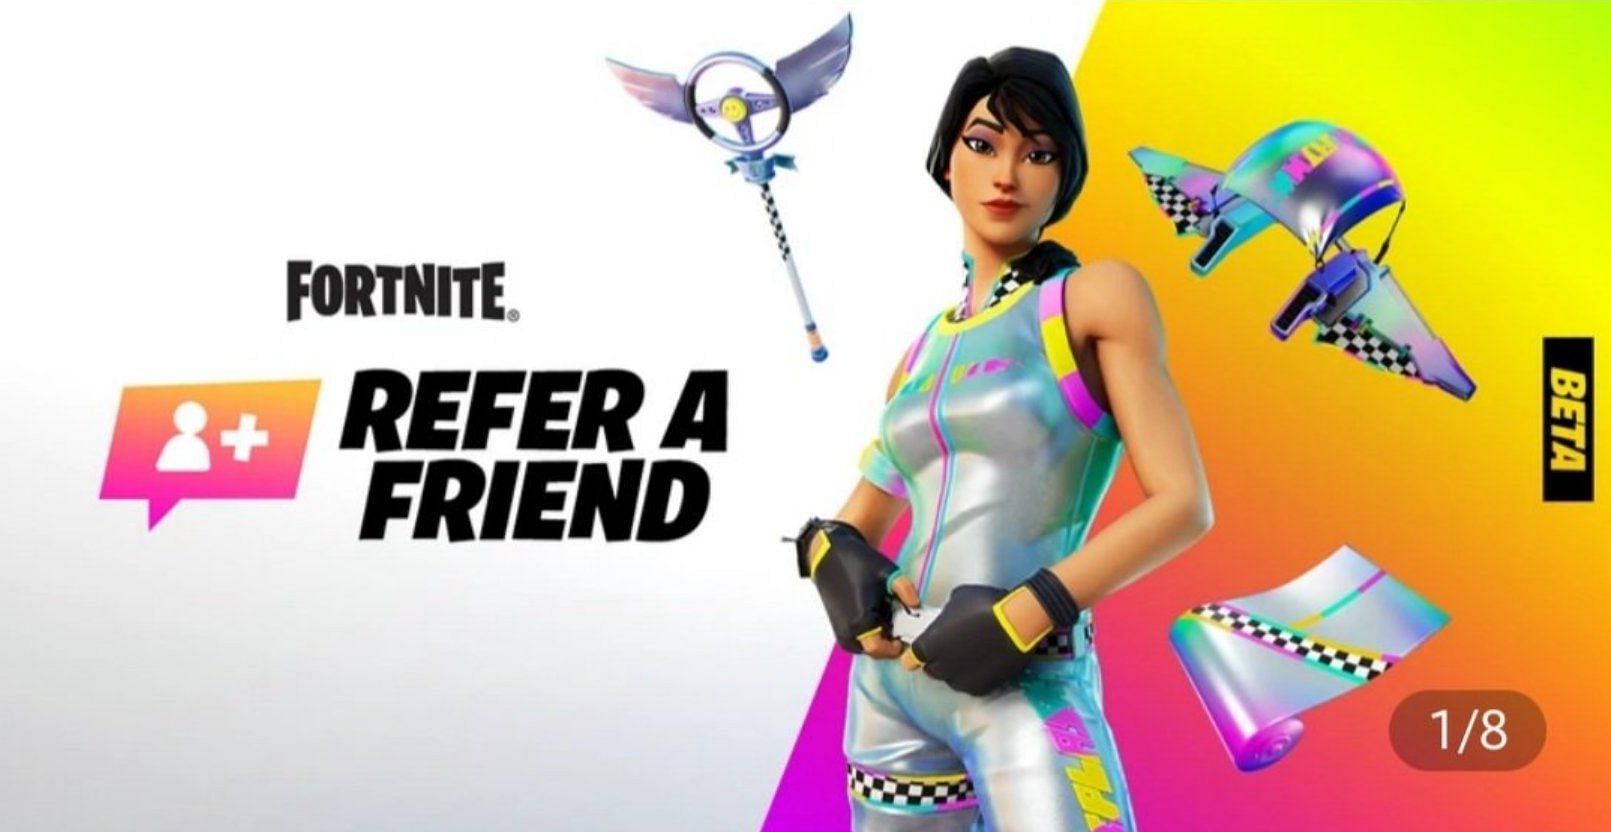 Fortnite Refer A Friend Program explained How to complete all quests